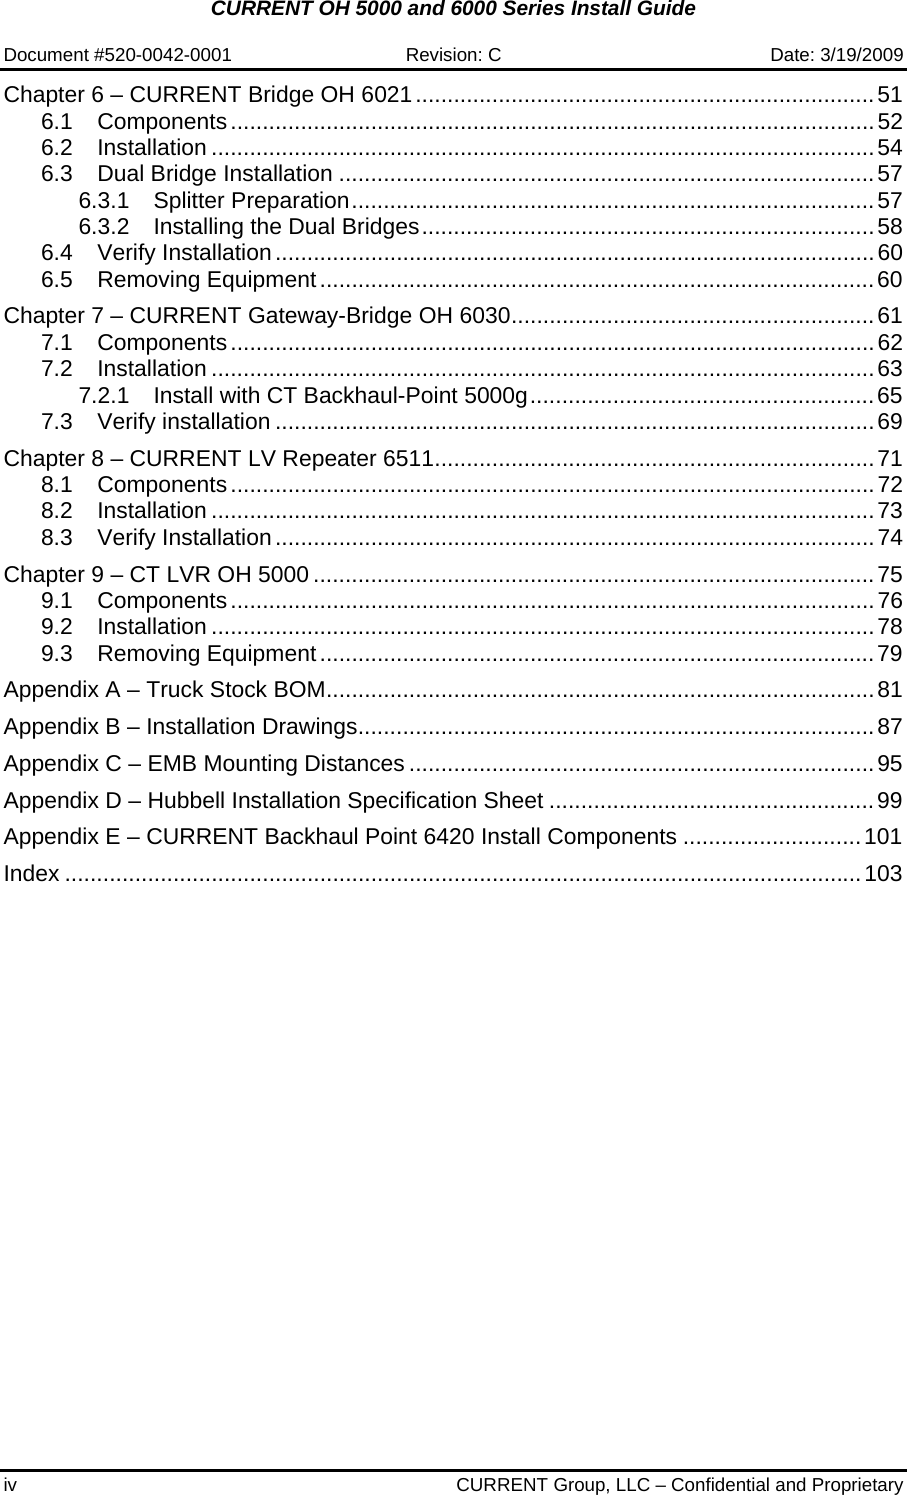 CURRENT OH 5000 and 6000 Series Install Guide  Document #520-0042-0001  Revision: C  Date: 3/19/2009 iv  CURRENT Group, LLC – Confidential and Proprietary Chapter 6 – CURRENT Bridge OH 6021........................................................................51 6.1 Components.....................................................................................................52 6.2 Installation ........................................................................................................54 6.3 Dual Bridge Installation ....................................................................................57 6.3.1 Splitter Preparation..................................................................................57 6.3.2 Installing the Dual Bridges.......................................................................58 6.4 Verify Installation..............................................................................................60 6.5 Removing Equipment.......................................................................................60 Chapter 7 – CURRENT Gateway-Bridge OH 6030.........................................................61 7.1 Components.....................................................................................................62 7.2 Installation ........................................................................................................63 7.2.1 Install with CT Backhaul-Point 5000g......................................................65 7.3 Verify installation ..............................................................................................69 Chapter 8 – CURRENT LV Repeater 6511.....................................................................71 8.1 Components.....................................................................................................72 8.2 Installation ........................................................................................................73 8.3 Verify Installation..............................................................................................74 Chapter 9 – CT LVR OH 5000 ........................................................................................75 9.1 Components.....................................................................................................76 9.2 Installation ........................................................................................................78 9.3 Removing Equipment.......................................................................................79 Appendix A – Truck Stock BOM......................................................................................81 Appendix B – Installation Drawings.................................................................................87 Appendix C – EMB Mounting Distances .........................................................................95 Appendix D – Hubbell Installation Specification Sheet ...................................................99 Appendix E – CURRENT Backhaul Point 6420 Install Components ............................101 Index .............................................................................................................................103 